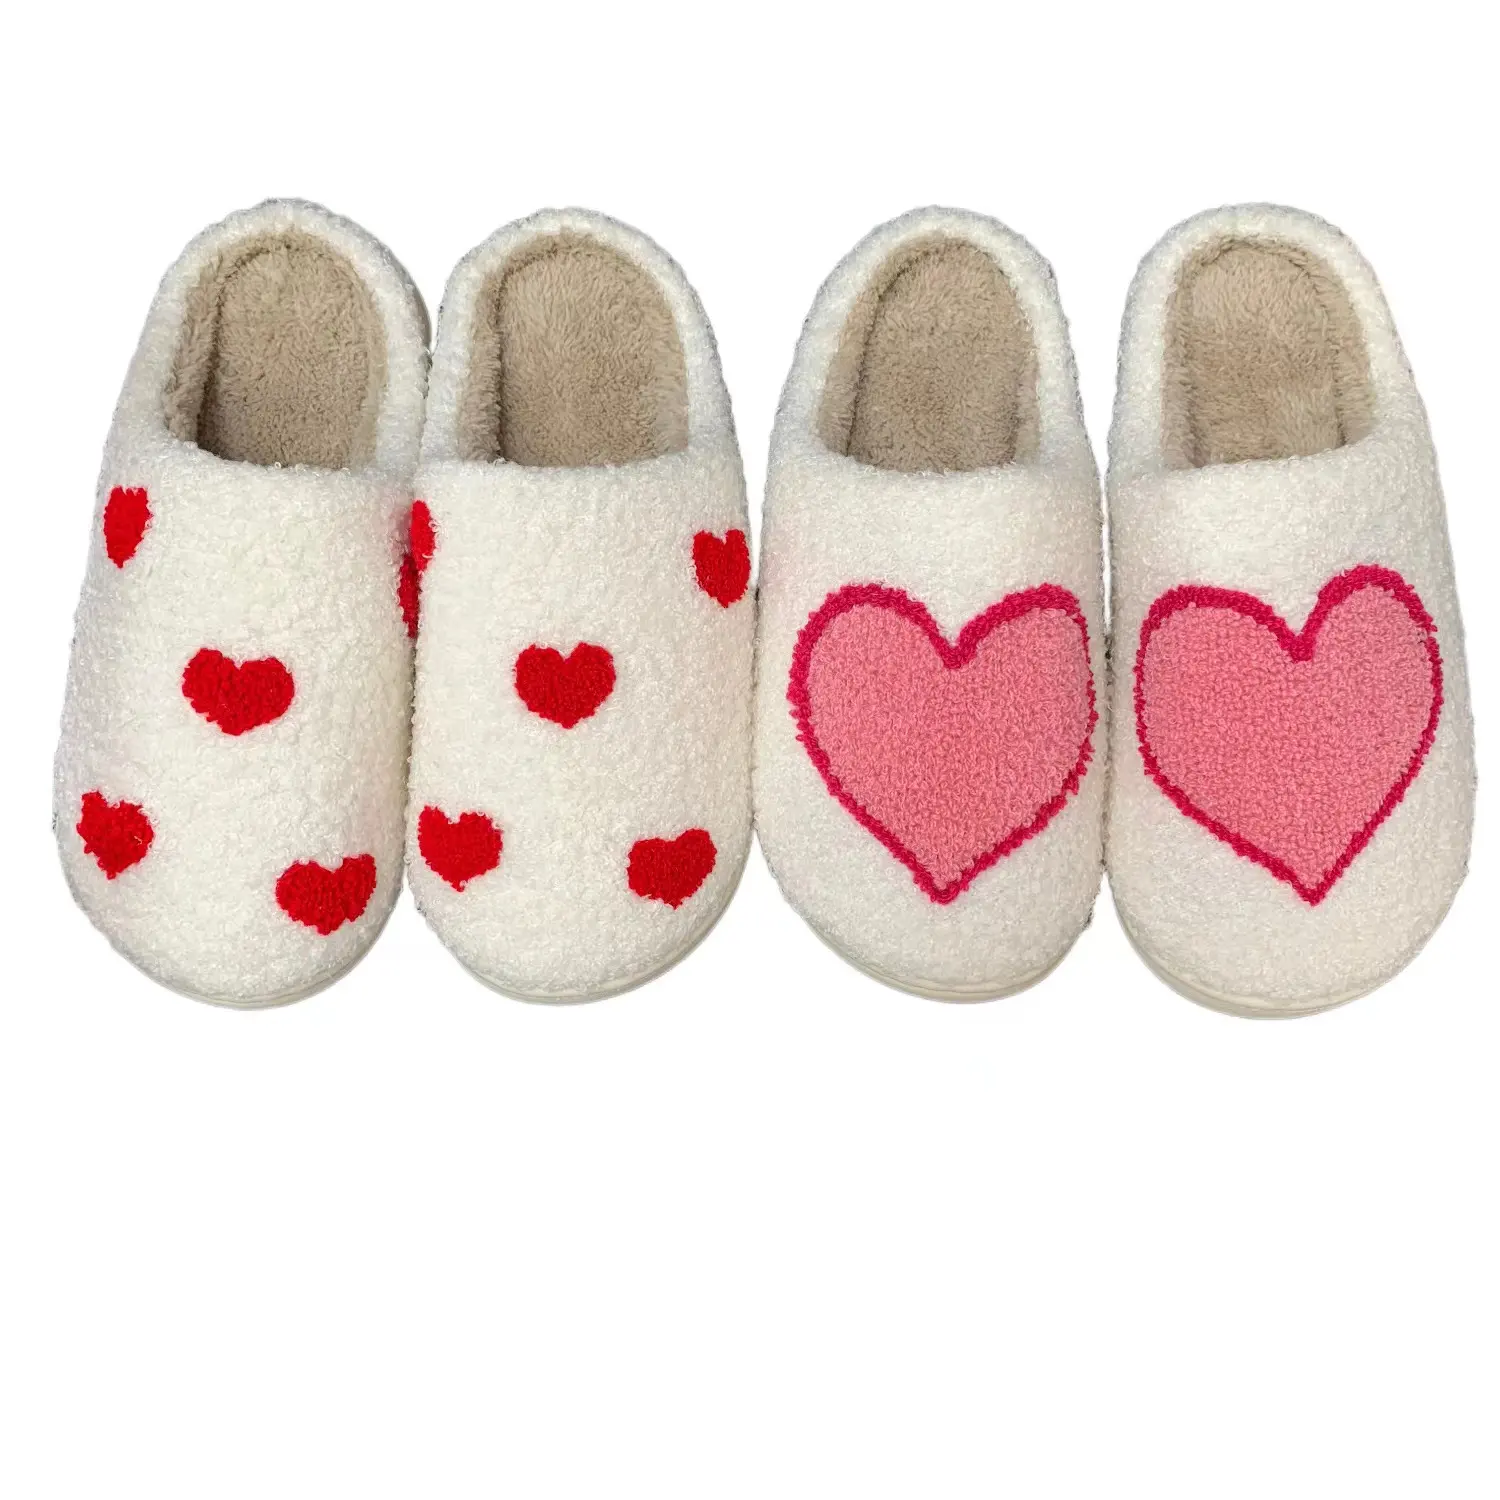 New Winter smiley face Home Slippers Warm Cute Flat fuzzy red heart Pattern Indoor Heart Slippers for women